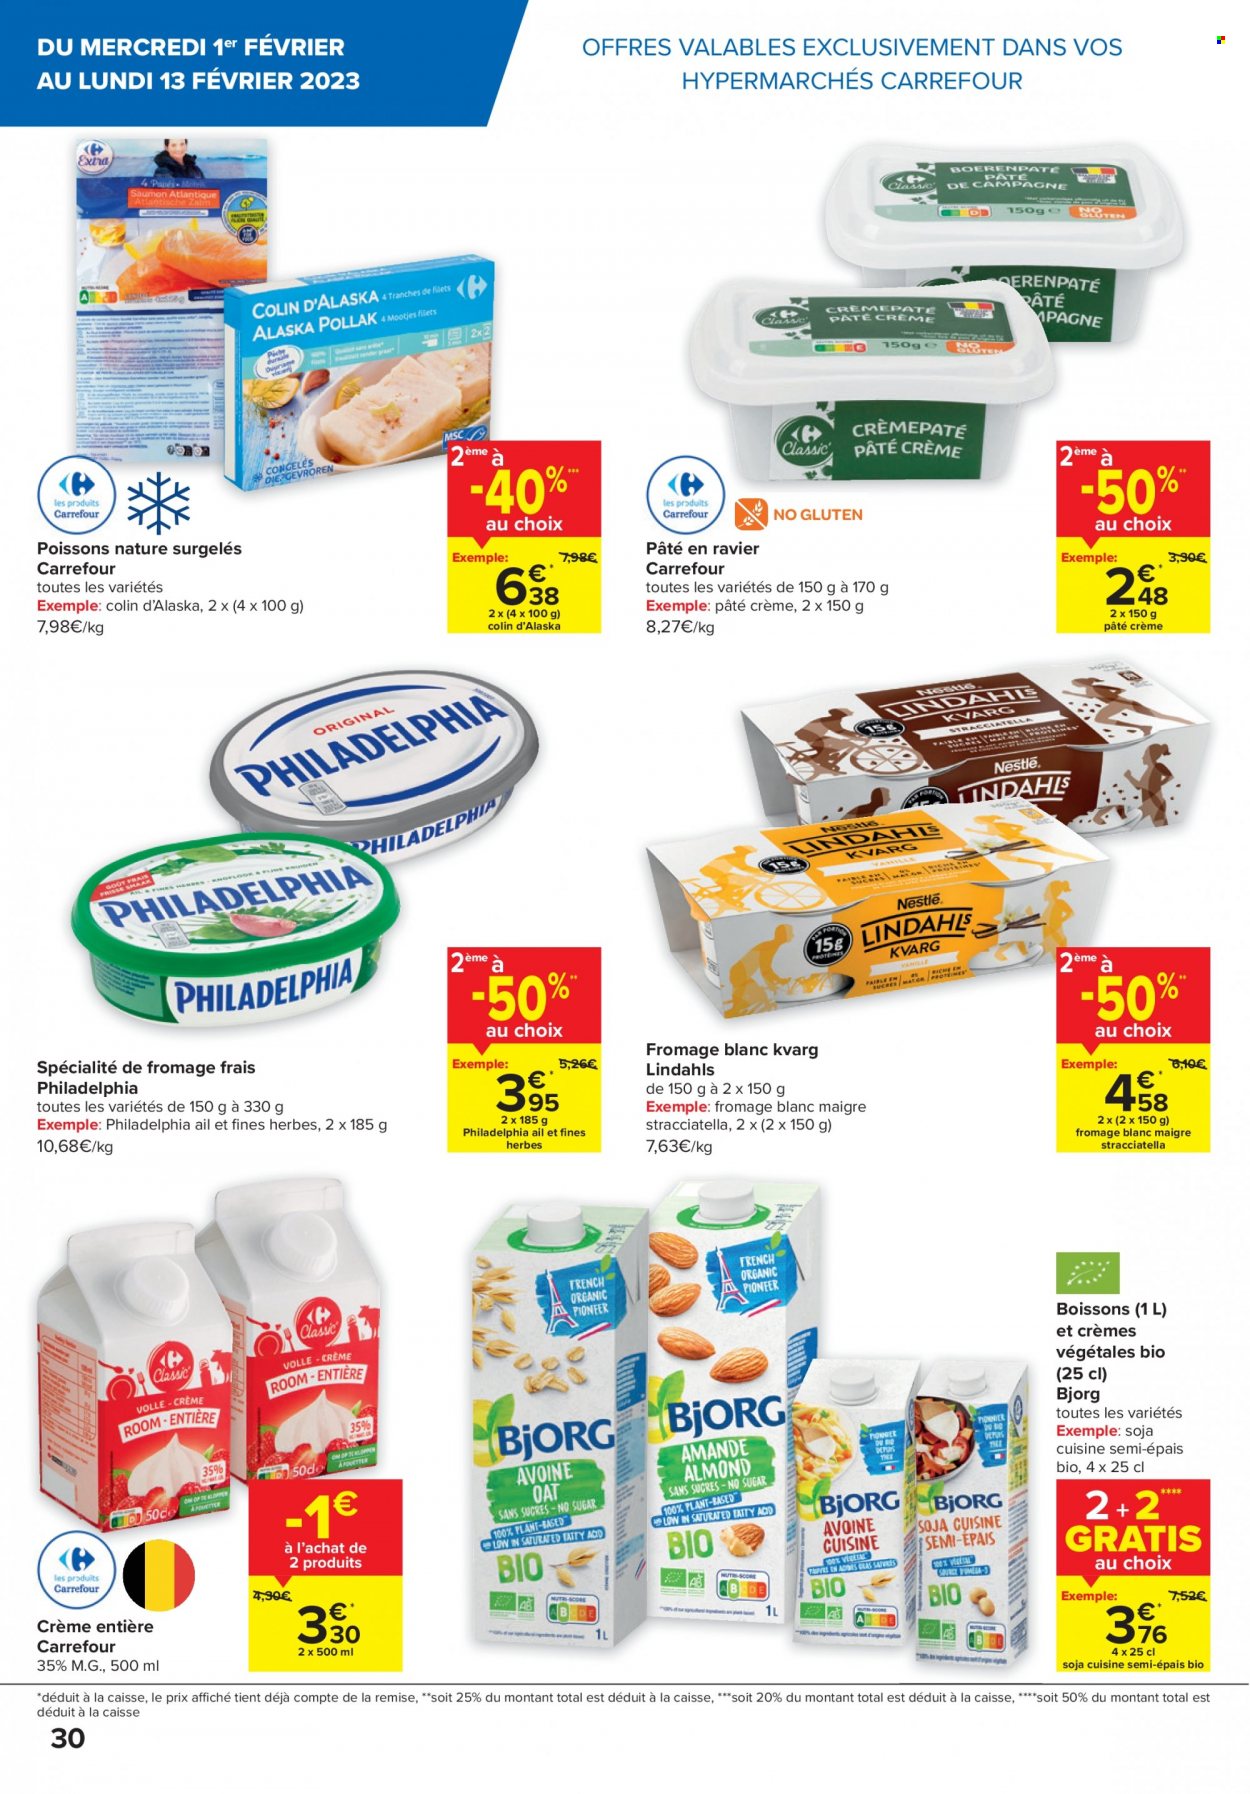 Catalogue Carrefour hypermarkt - 1.2.2023 - 13.2.2023. Page 30.